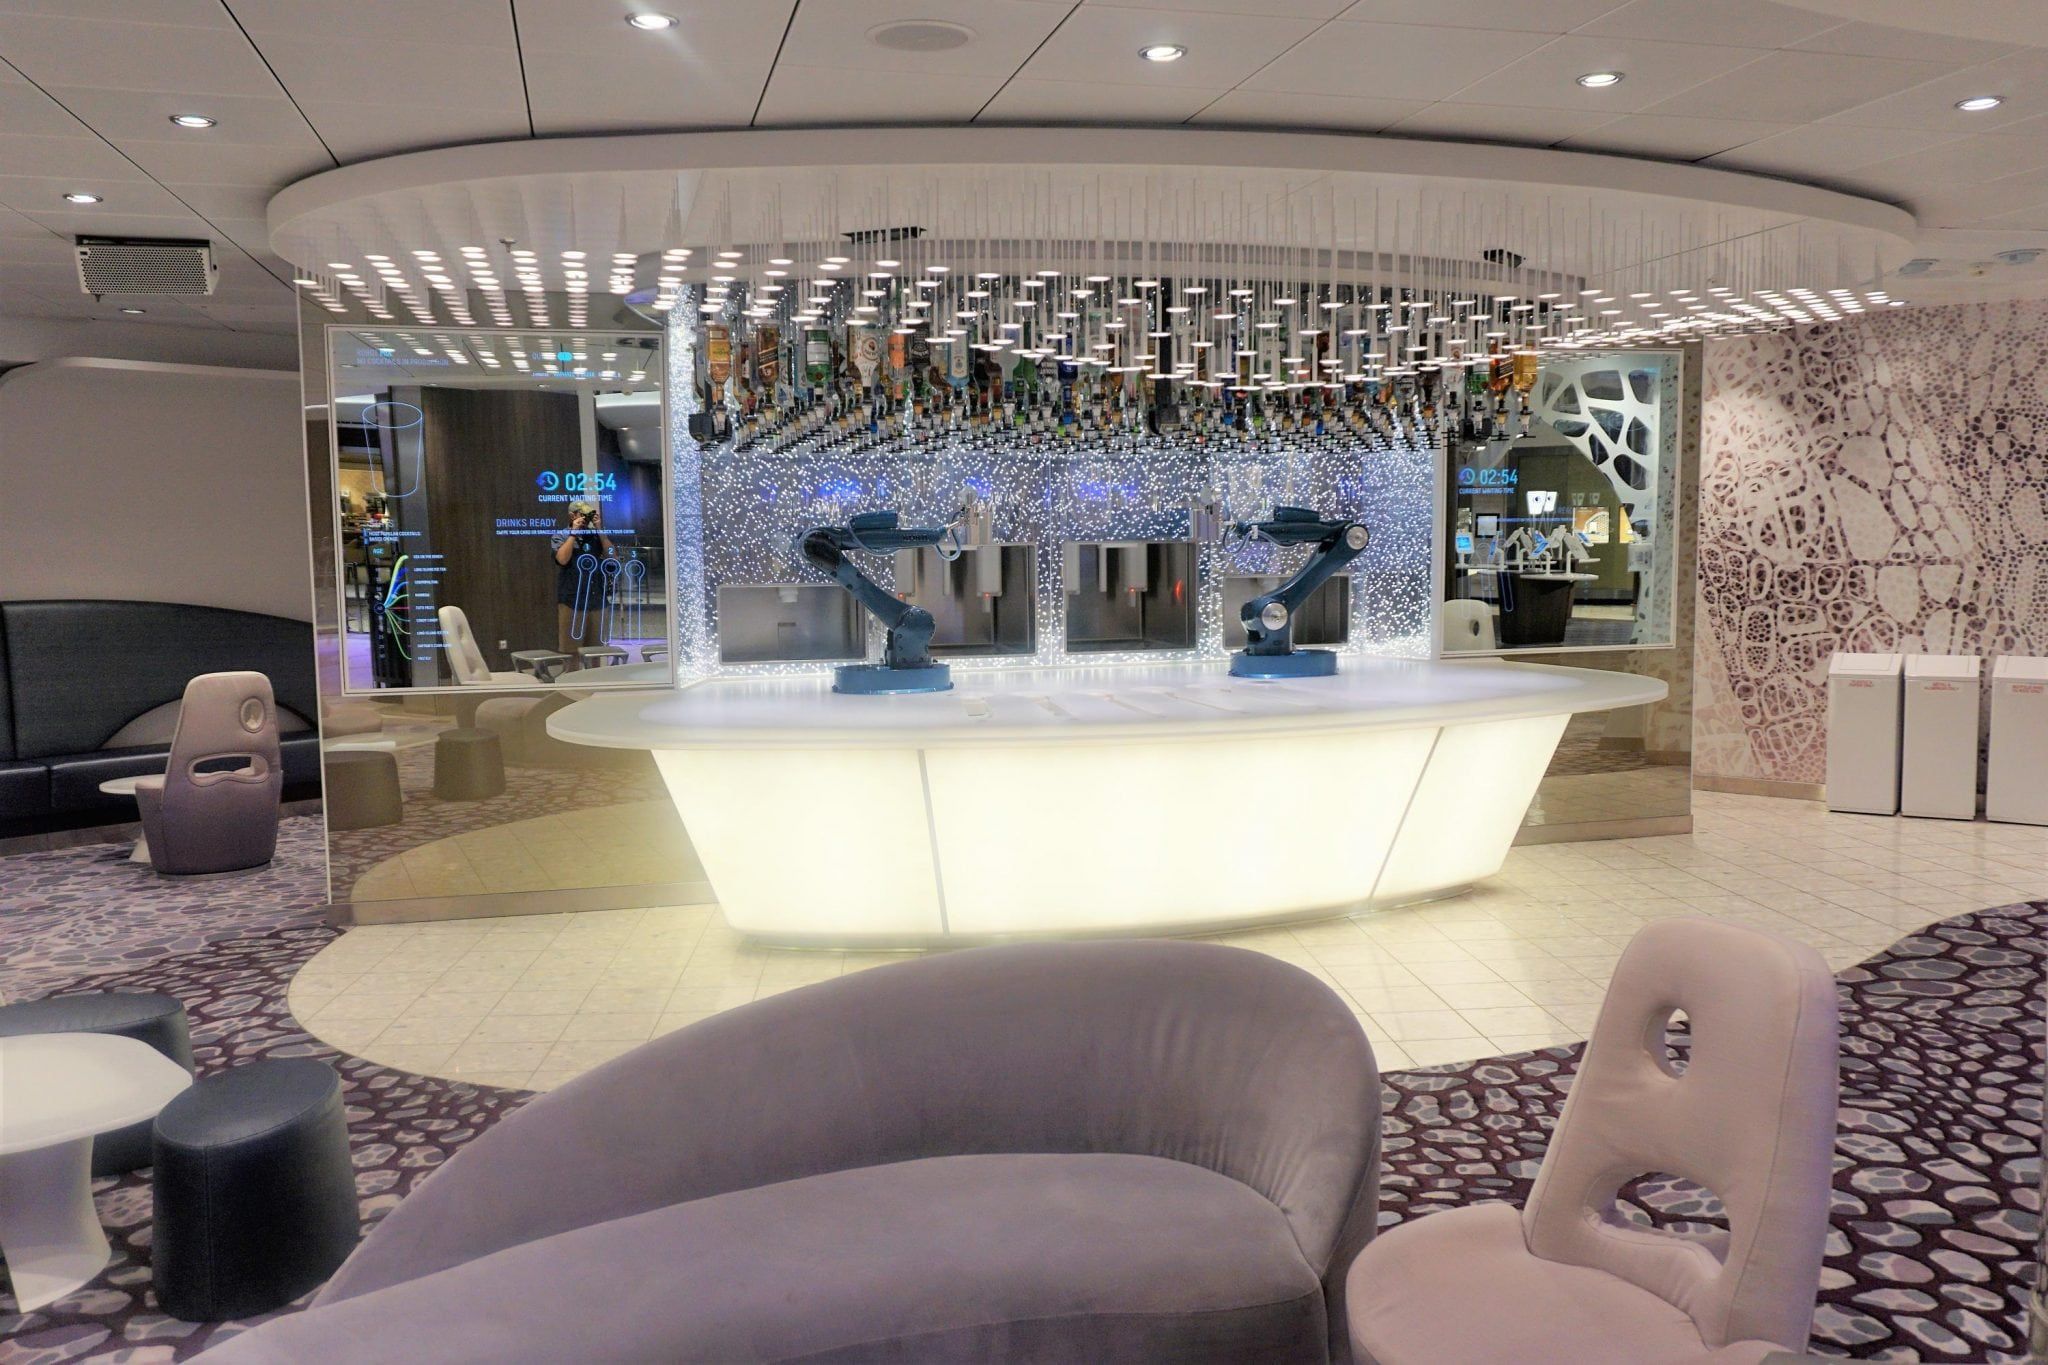 Top Things to do on Harmony of the Seas